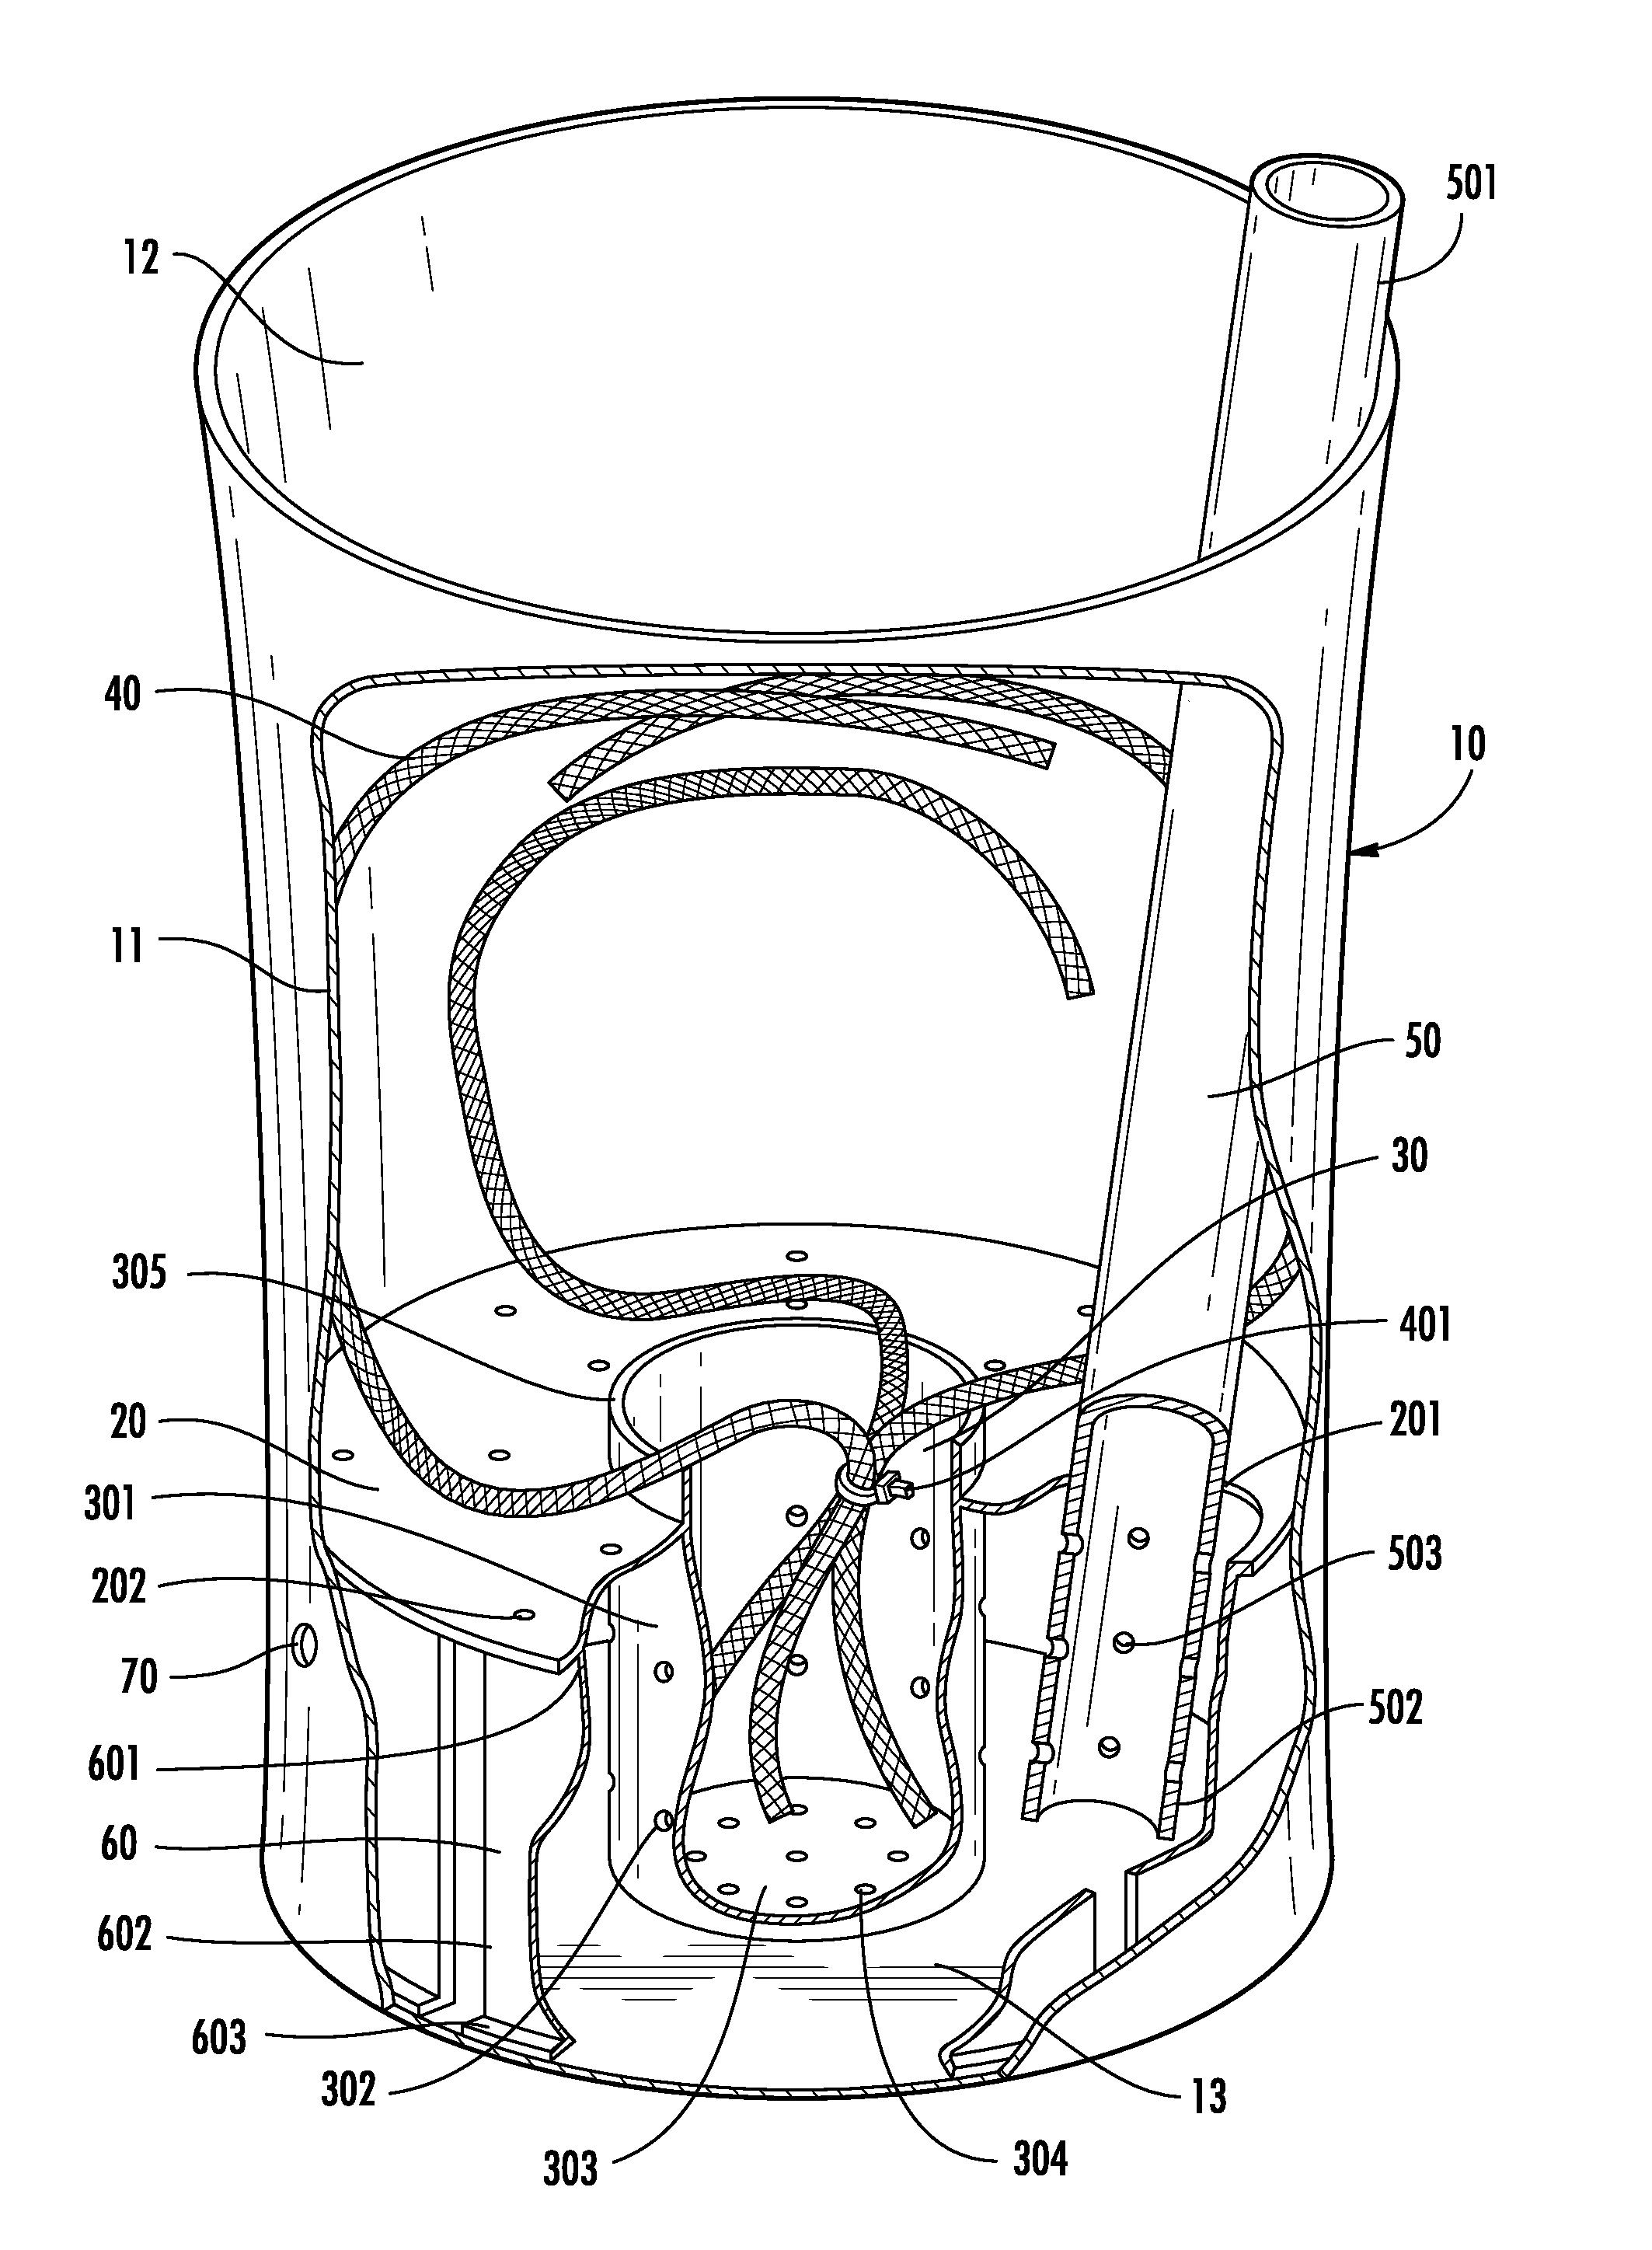 Insertable plant watering device and reservoir with inlet pipe